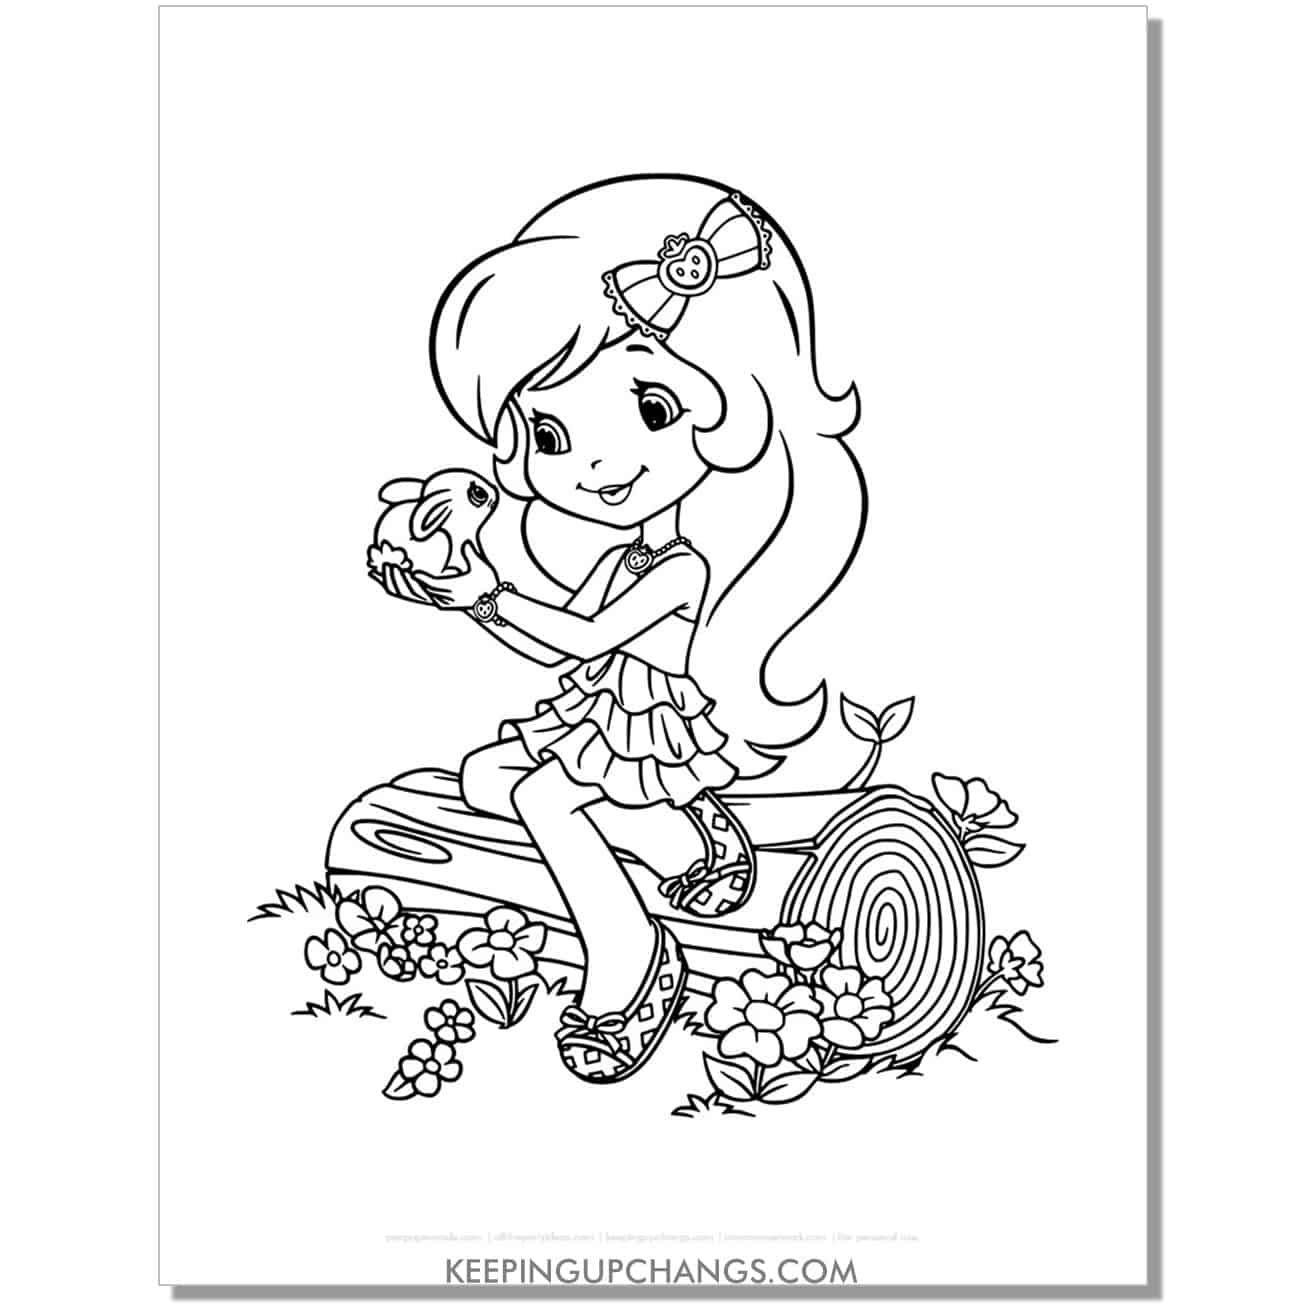 free strawberry shortcake holding baby bunny coloring page, sheet.